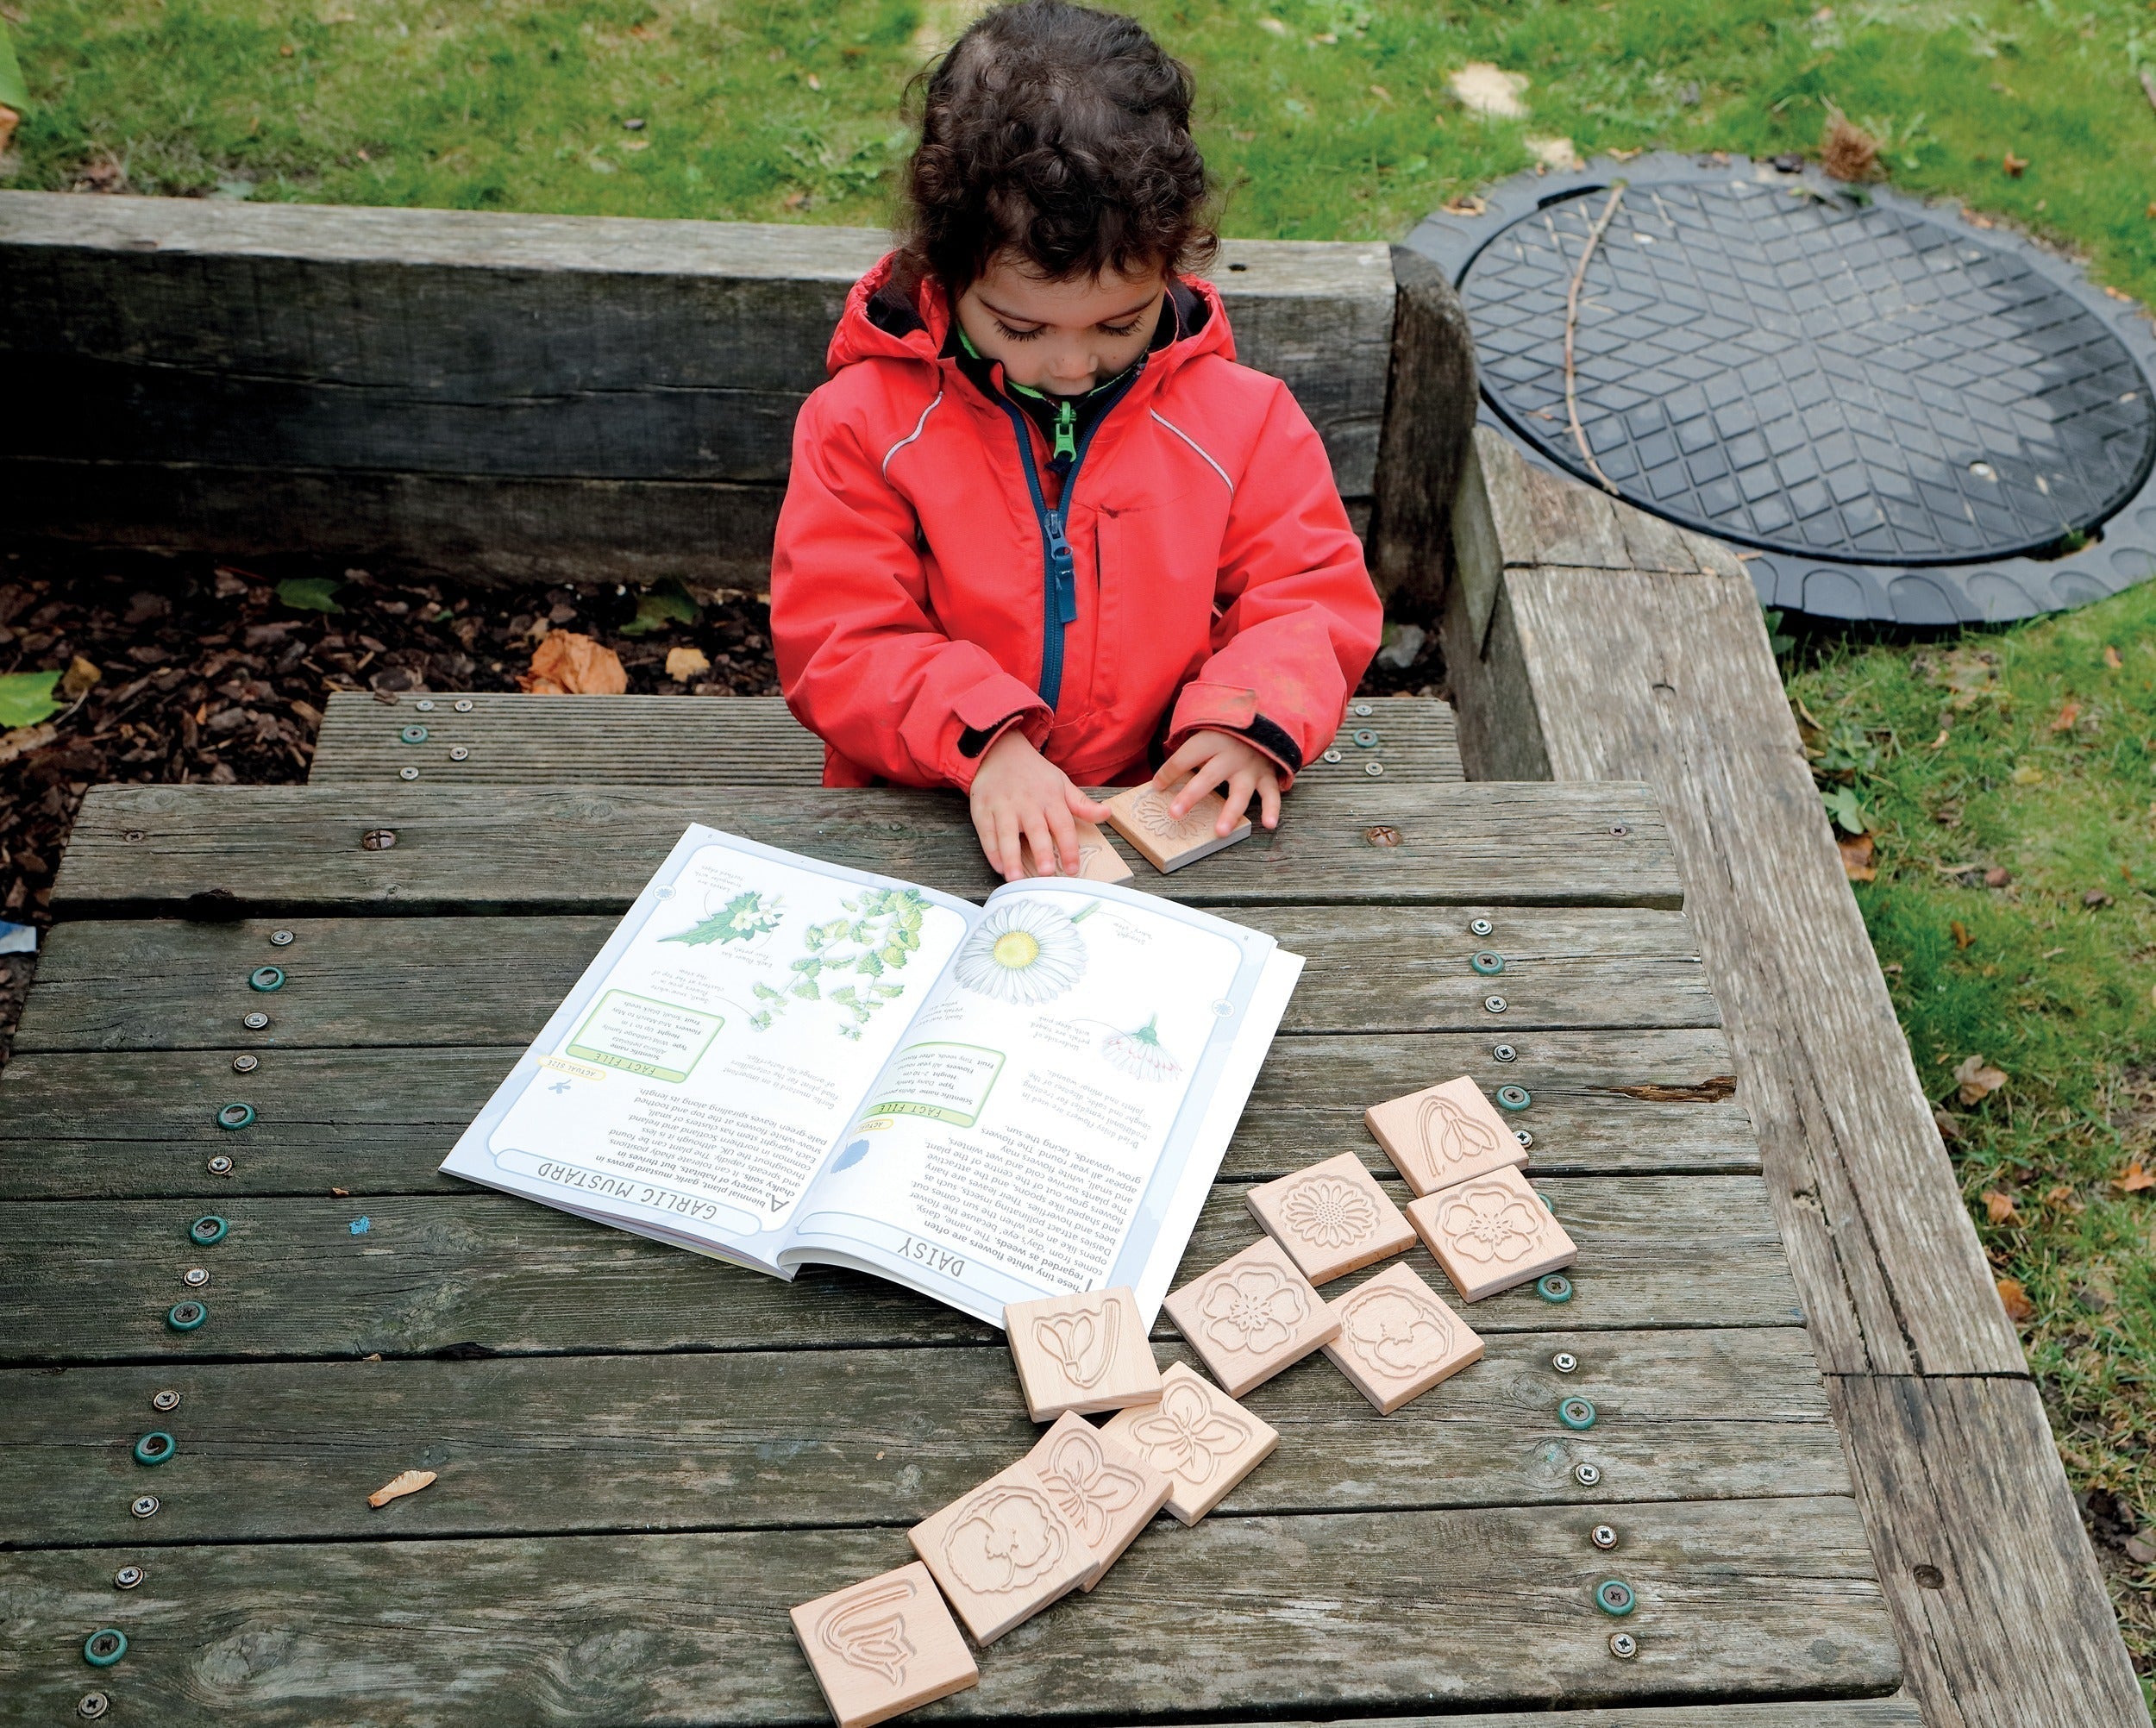 Match Me Sensory Flower Tiles, These Match Me Sensory Flower Tiles offer a wonderful sensory experience as children can touch, feel and match to patterns and shapes found in the natural world.The Match Me Sensory Flower Tiles are ideal for creating imprints and rubbings, language development and nature walks, as well as being an appealing resource for treasure baskets and loose parts play. Each Match Me Sensory Flower Tiles set contains 12 tiles of six different flower pairs: bluebell, buttercup, daisy, pop